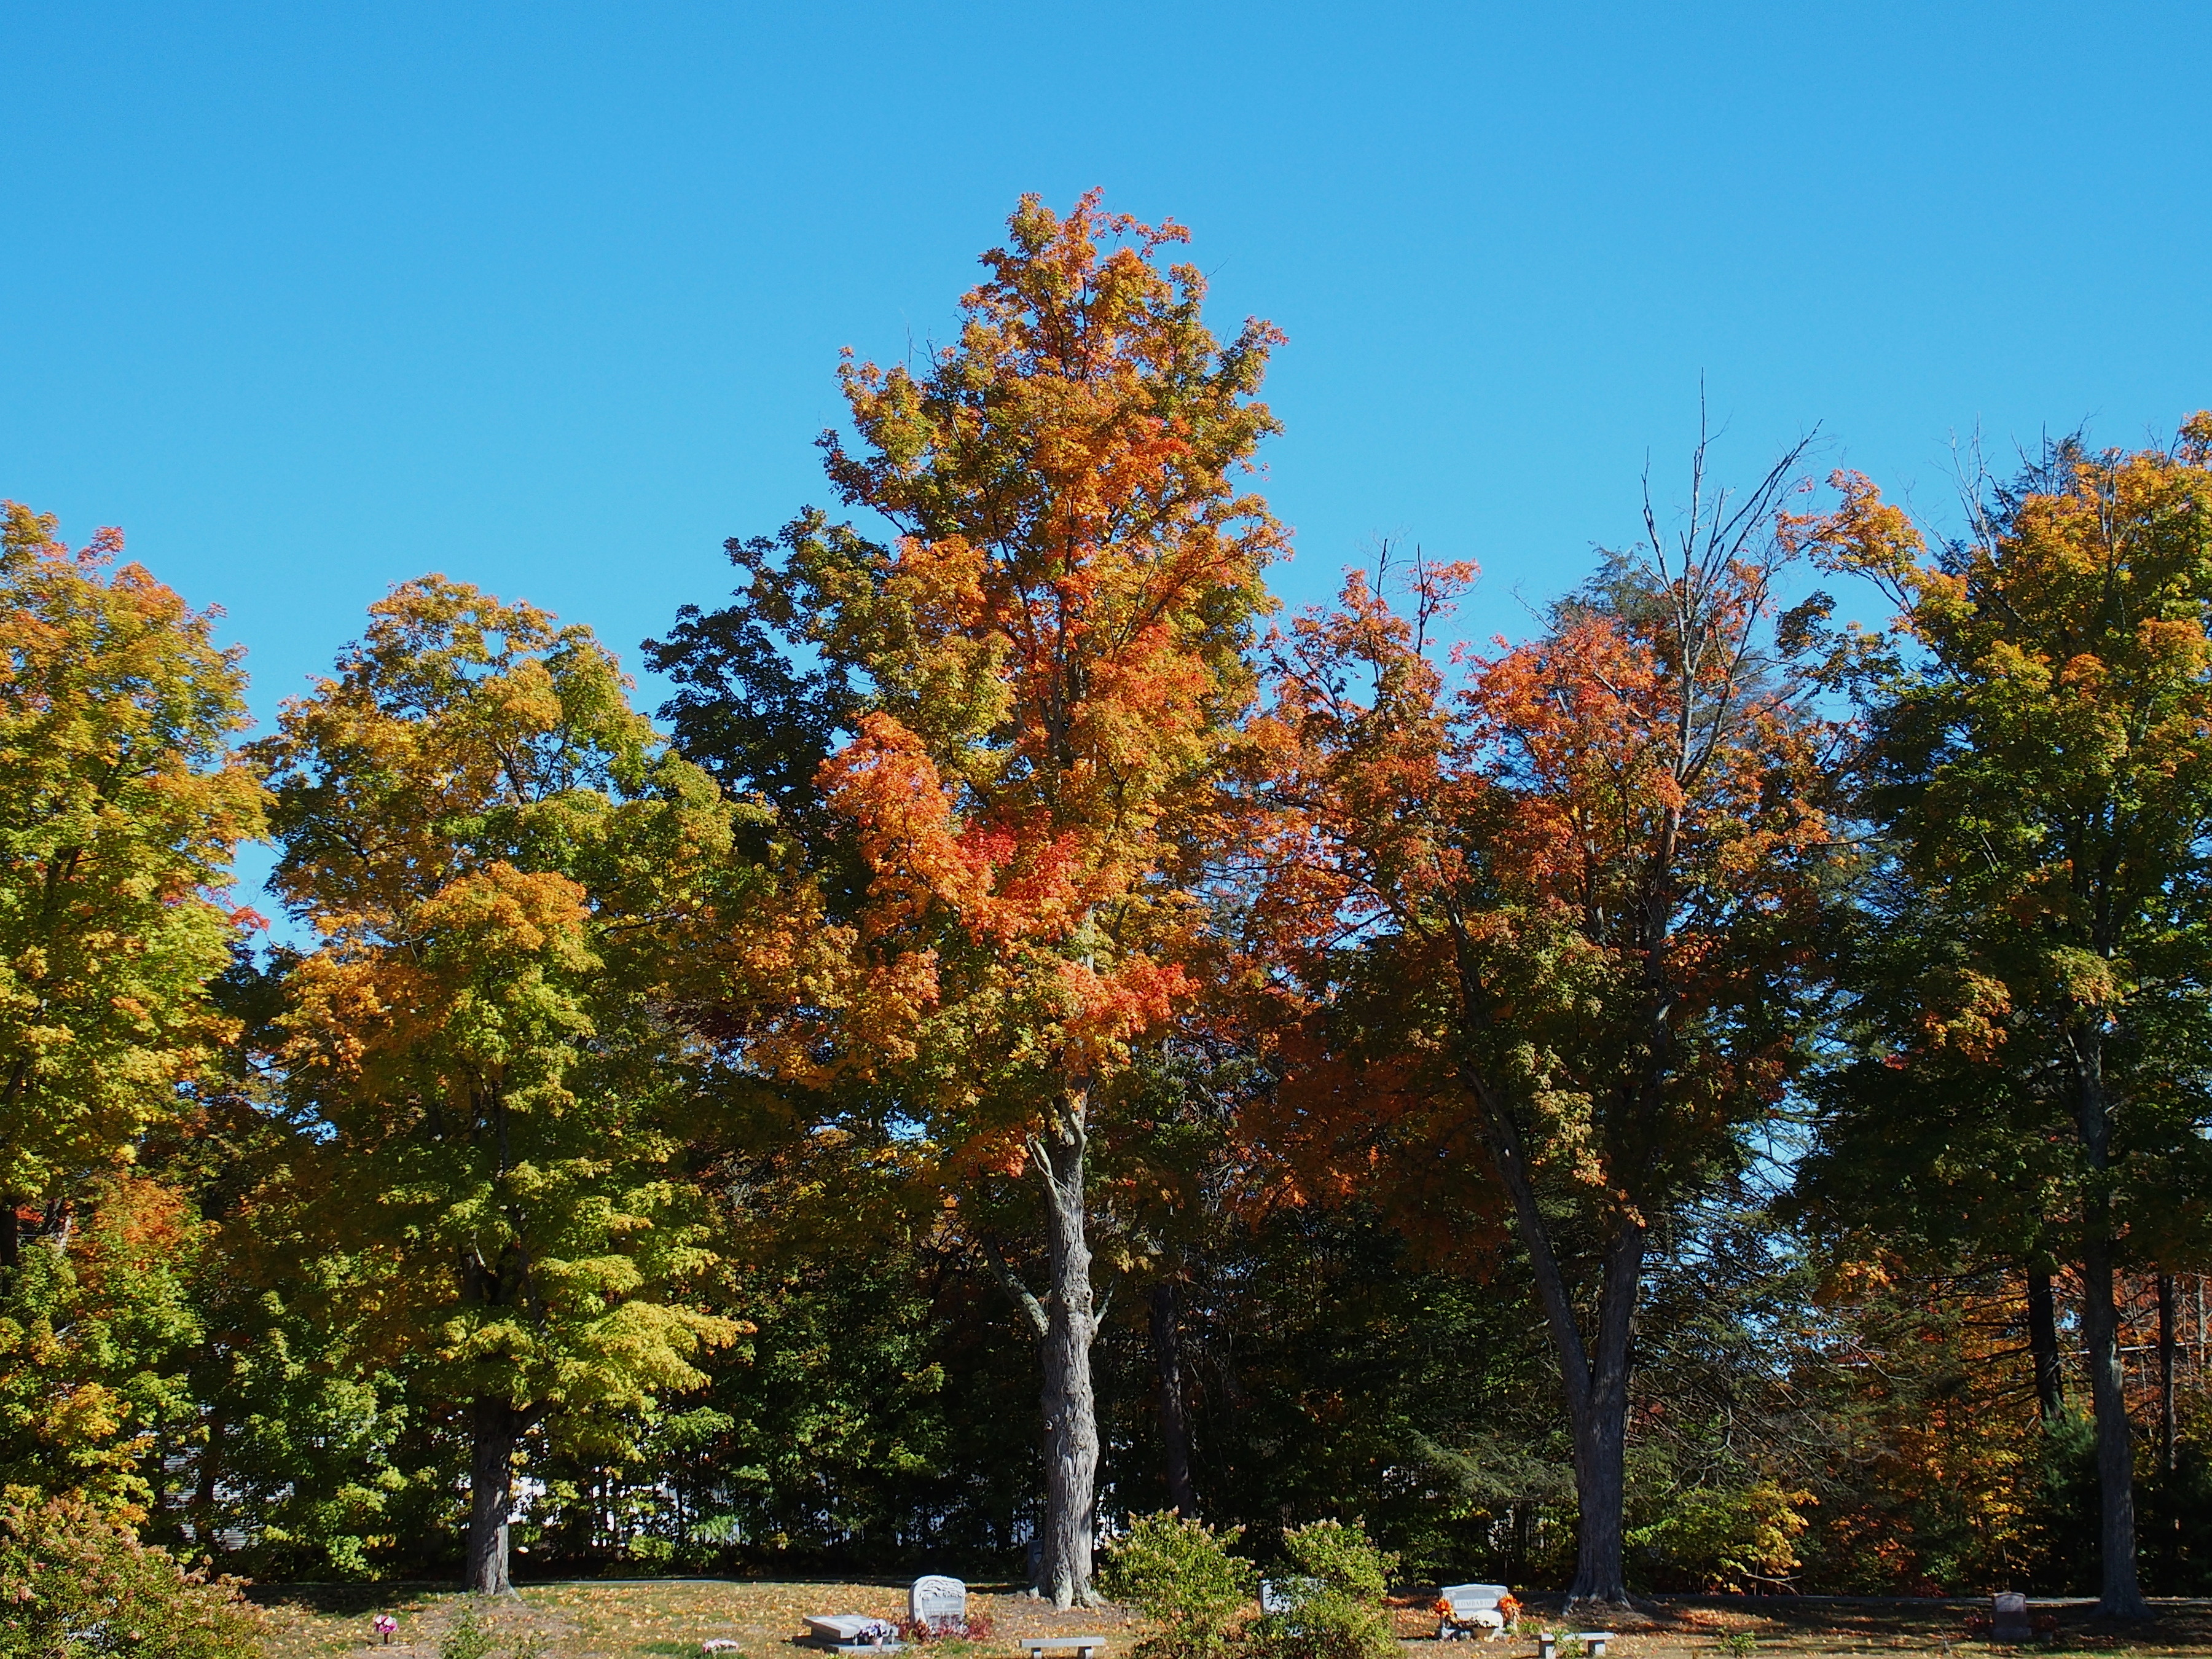 West Parish Cemetery, Anover, MA in fall #10